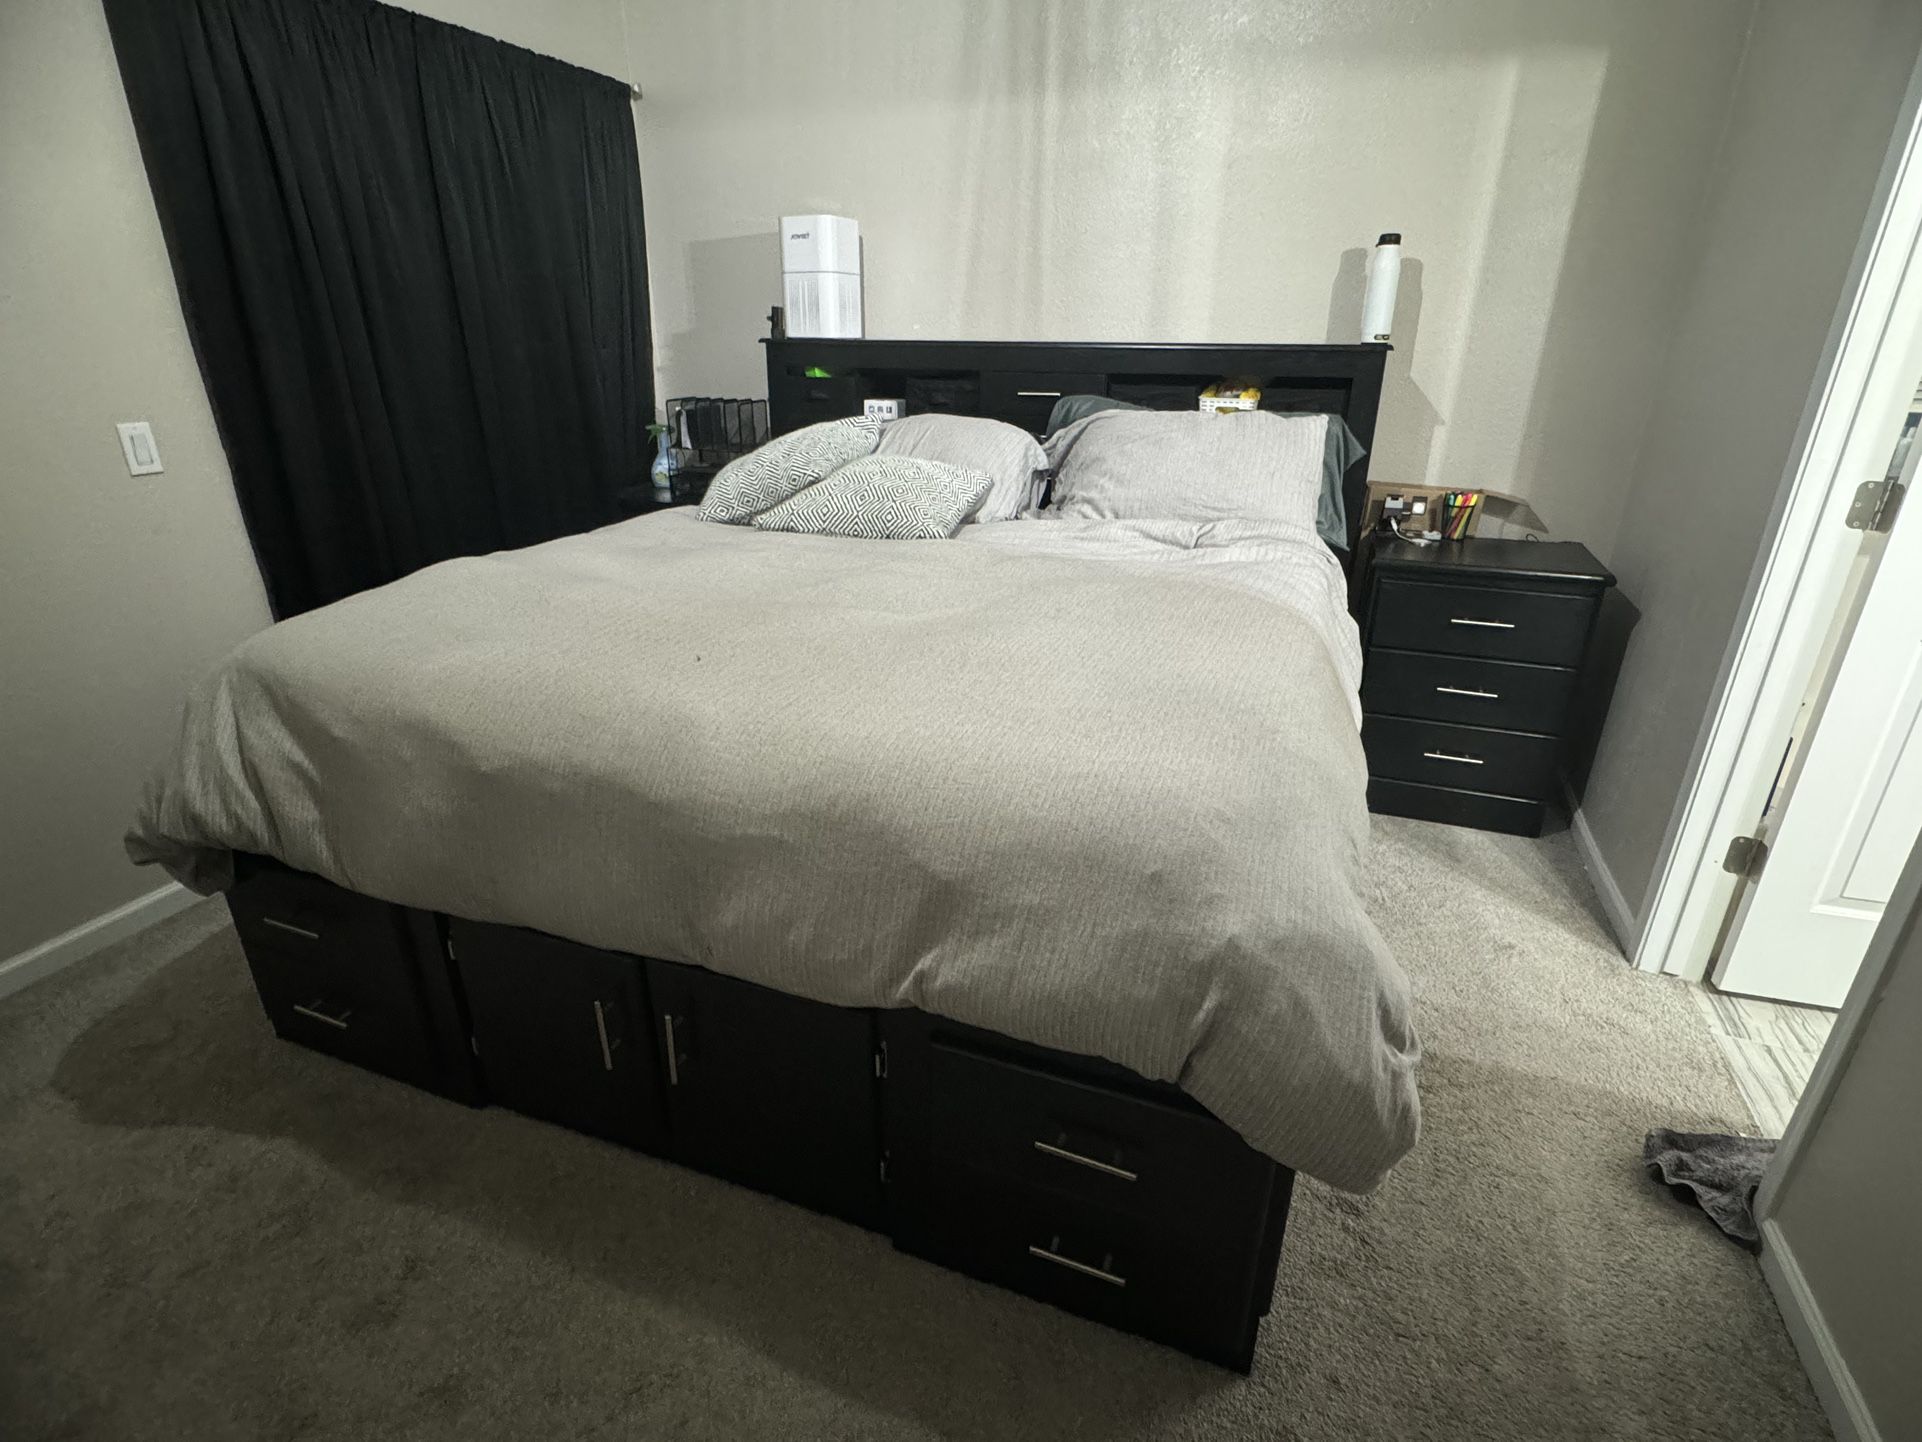 king size bed set with bed and 2 end tables